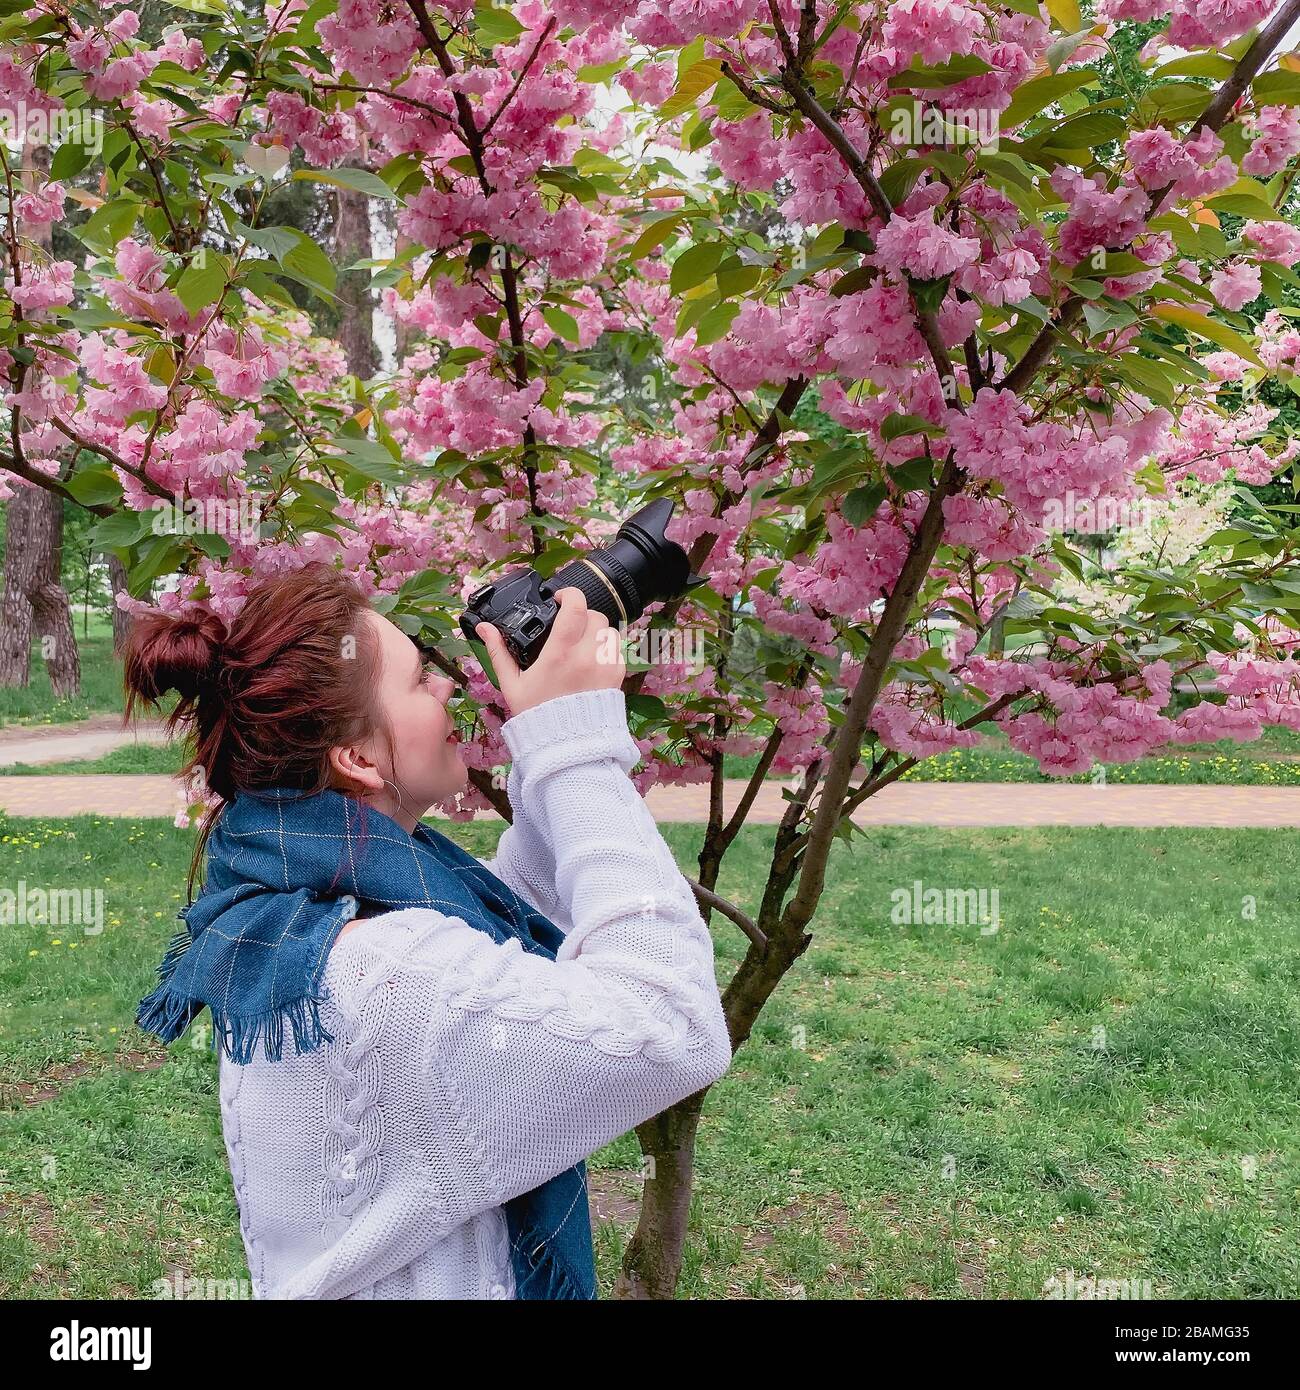 young happy smiling red-haired woman with a white sweater and blue scarf takes a picture with a flowering pink sakura tree in a park in the city of Stock Photo